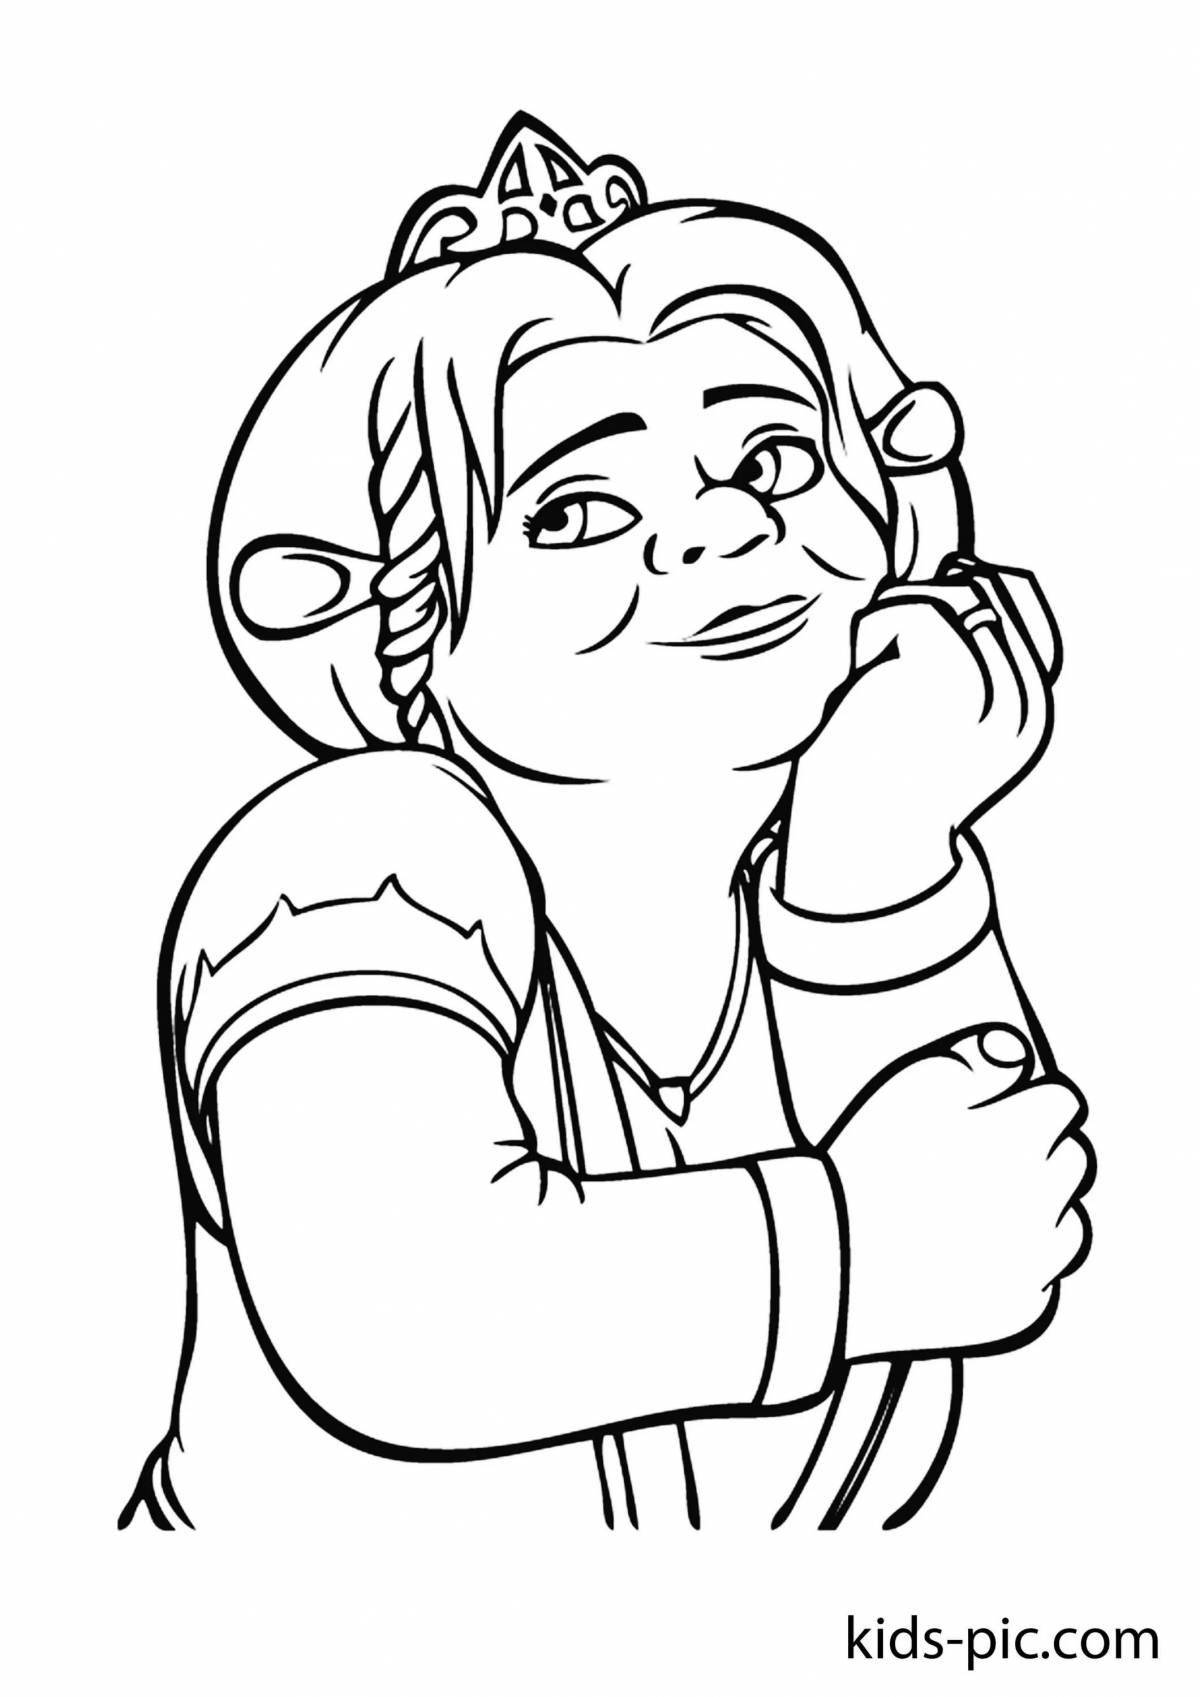 Blessed Shrek and Fiona coloring book